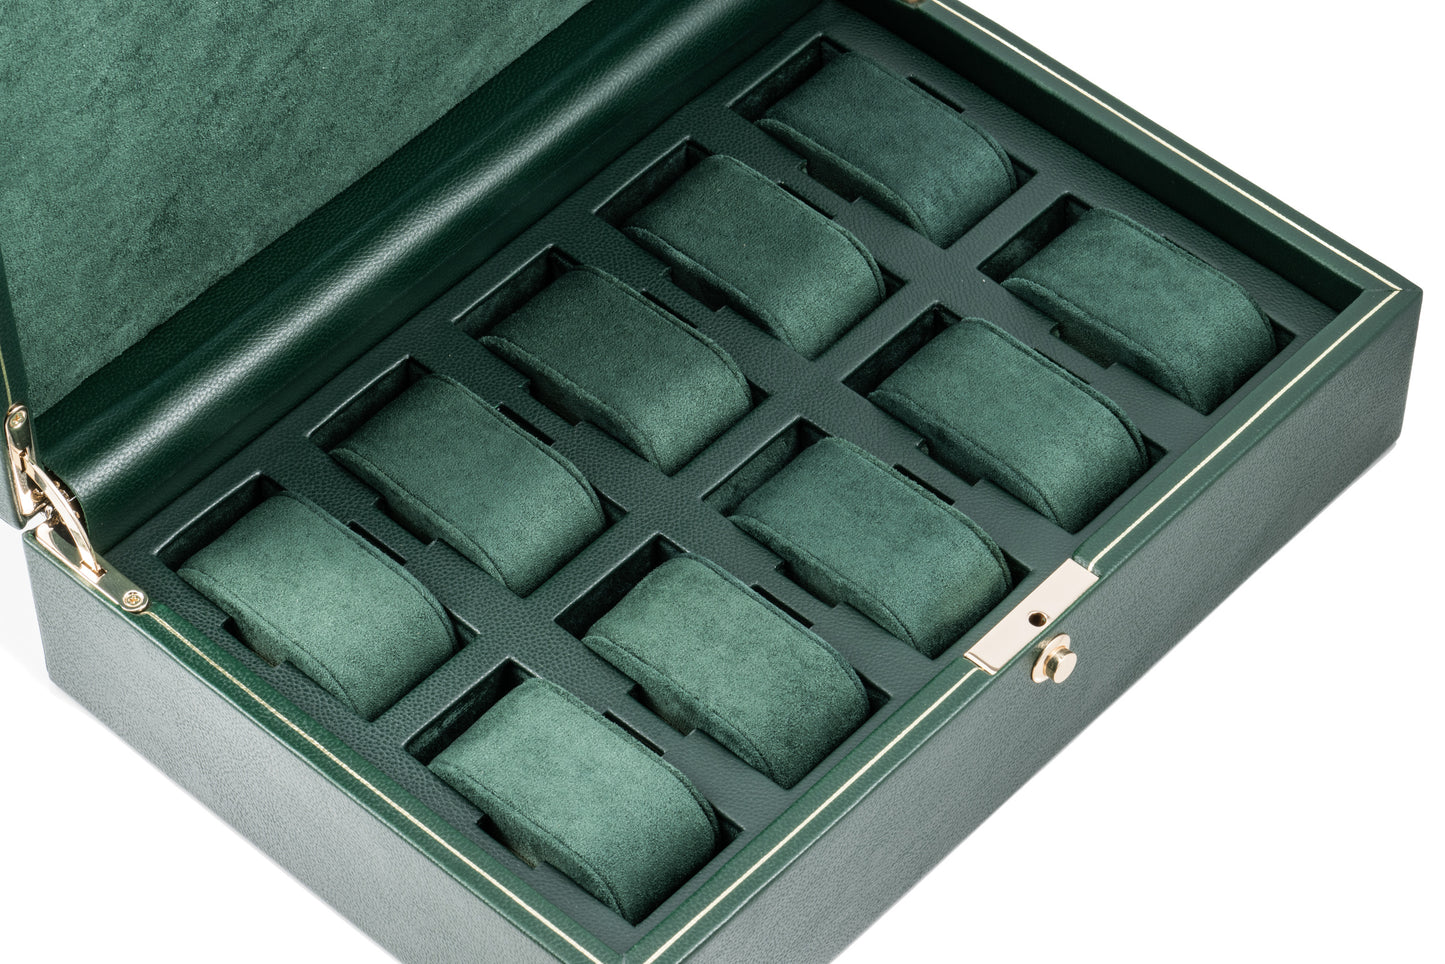 WOLF X Analog:Shift Vintage Collection 10-Piece Watch Box